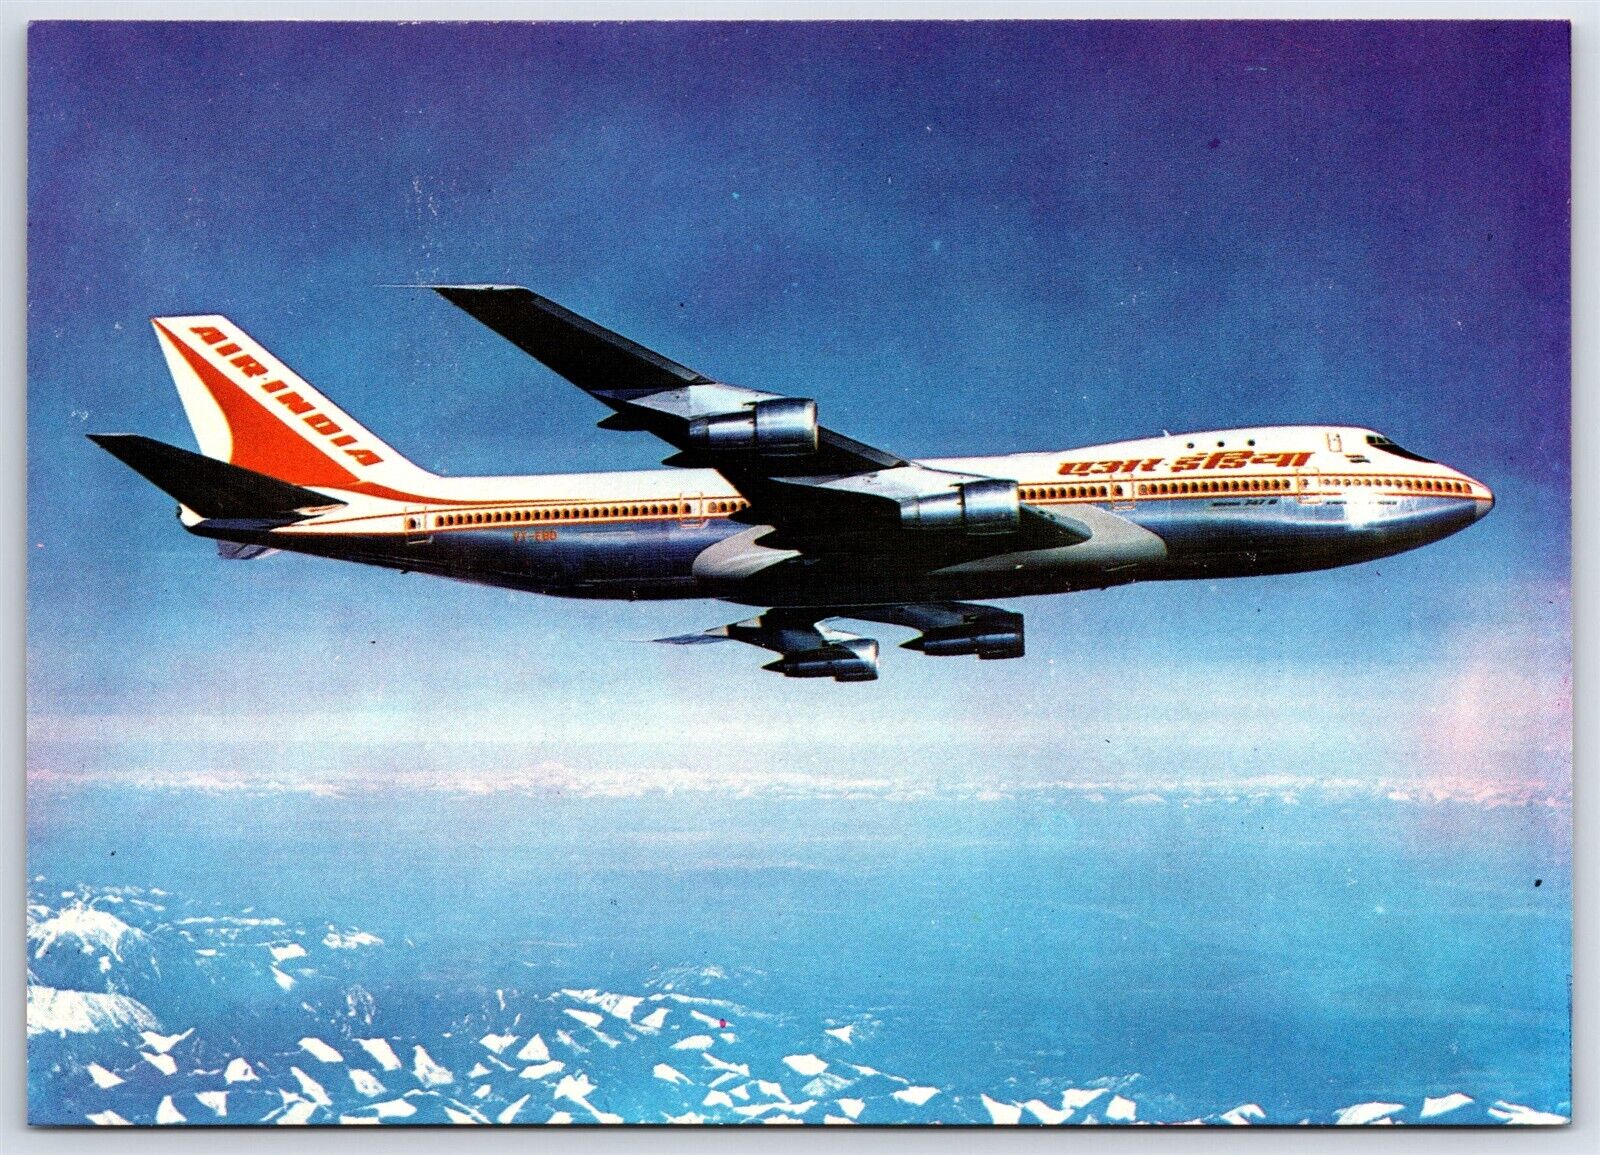 Airplane Postcard Air India Airlines Jumbo Boeing 747 Movifoto #50046 FI.2